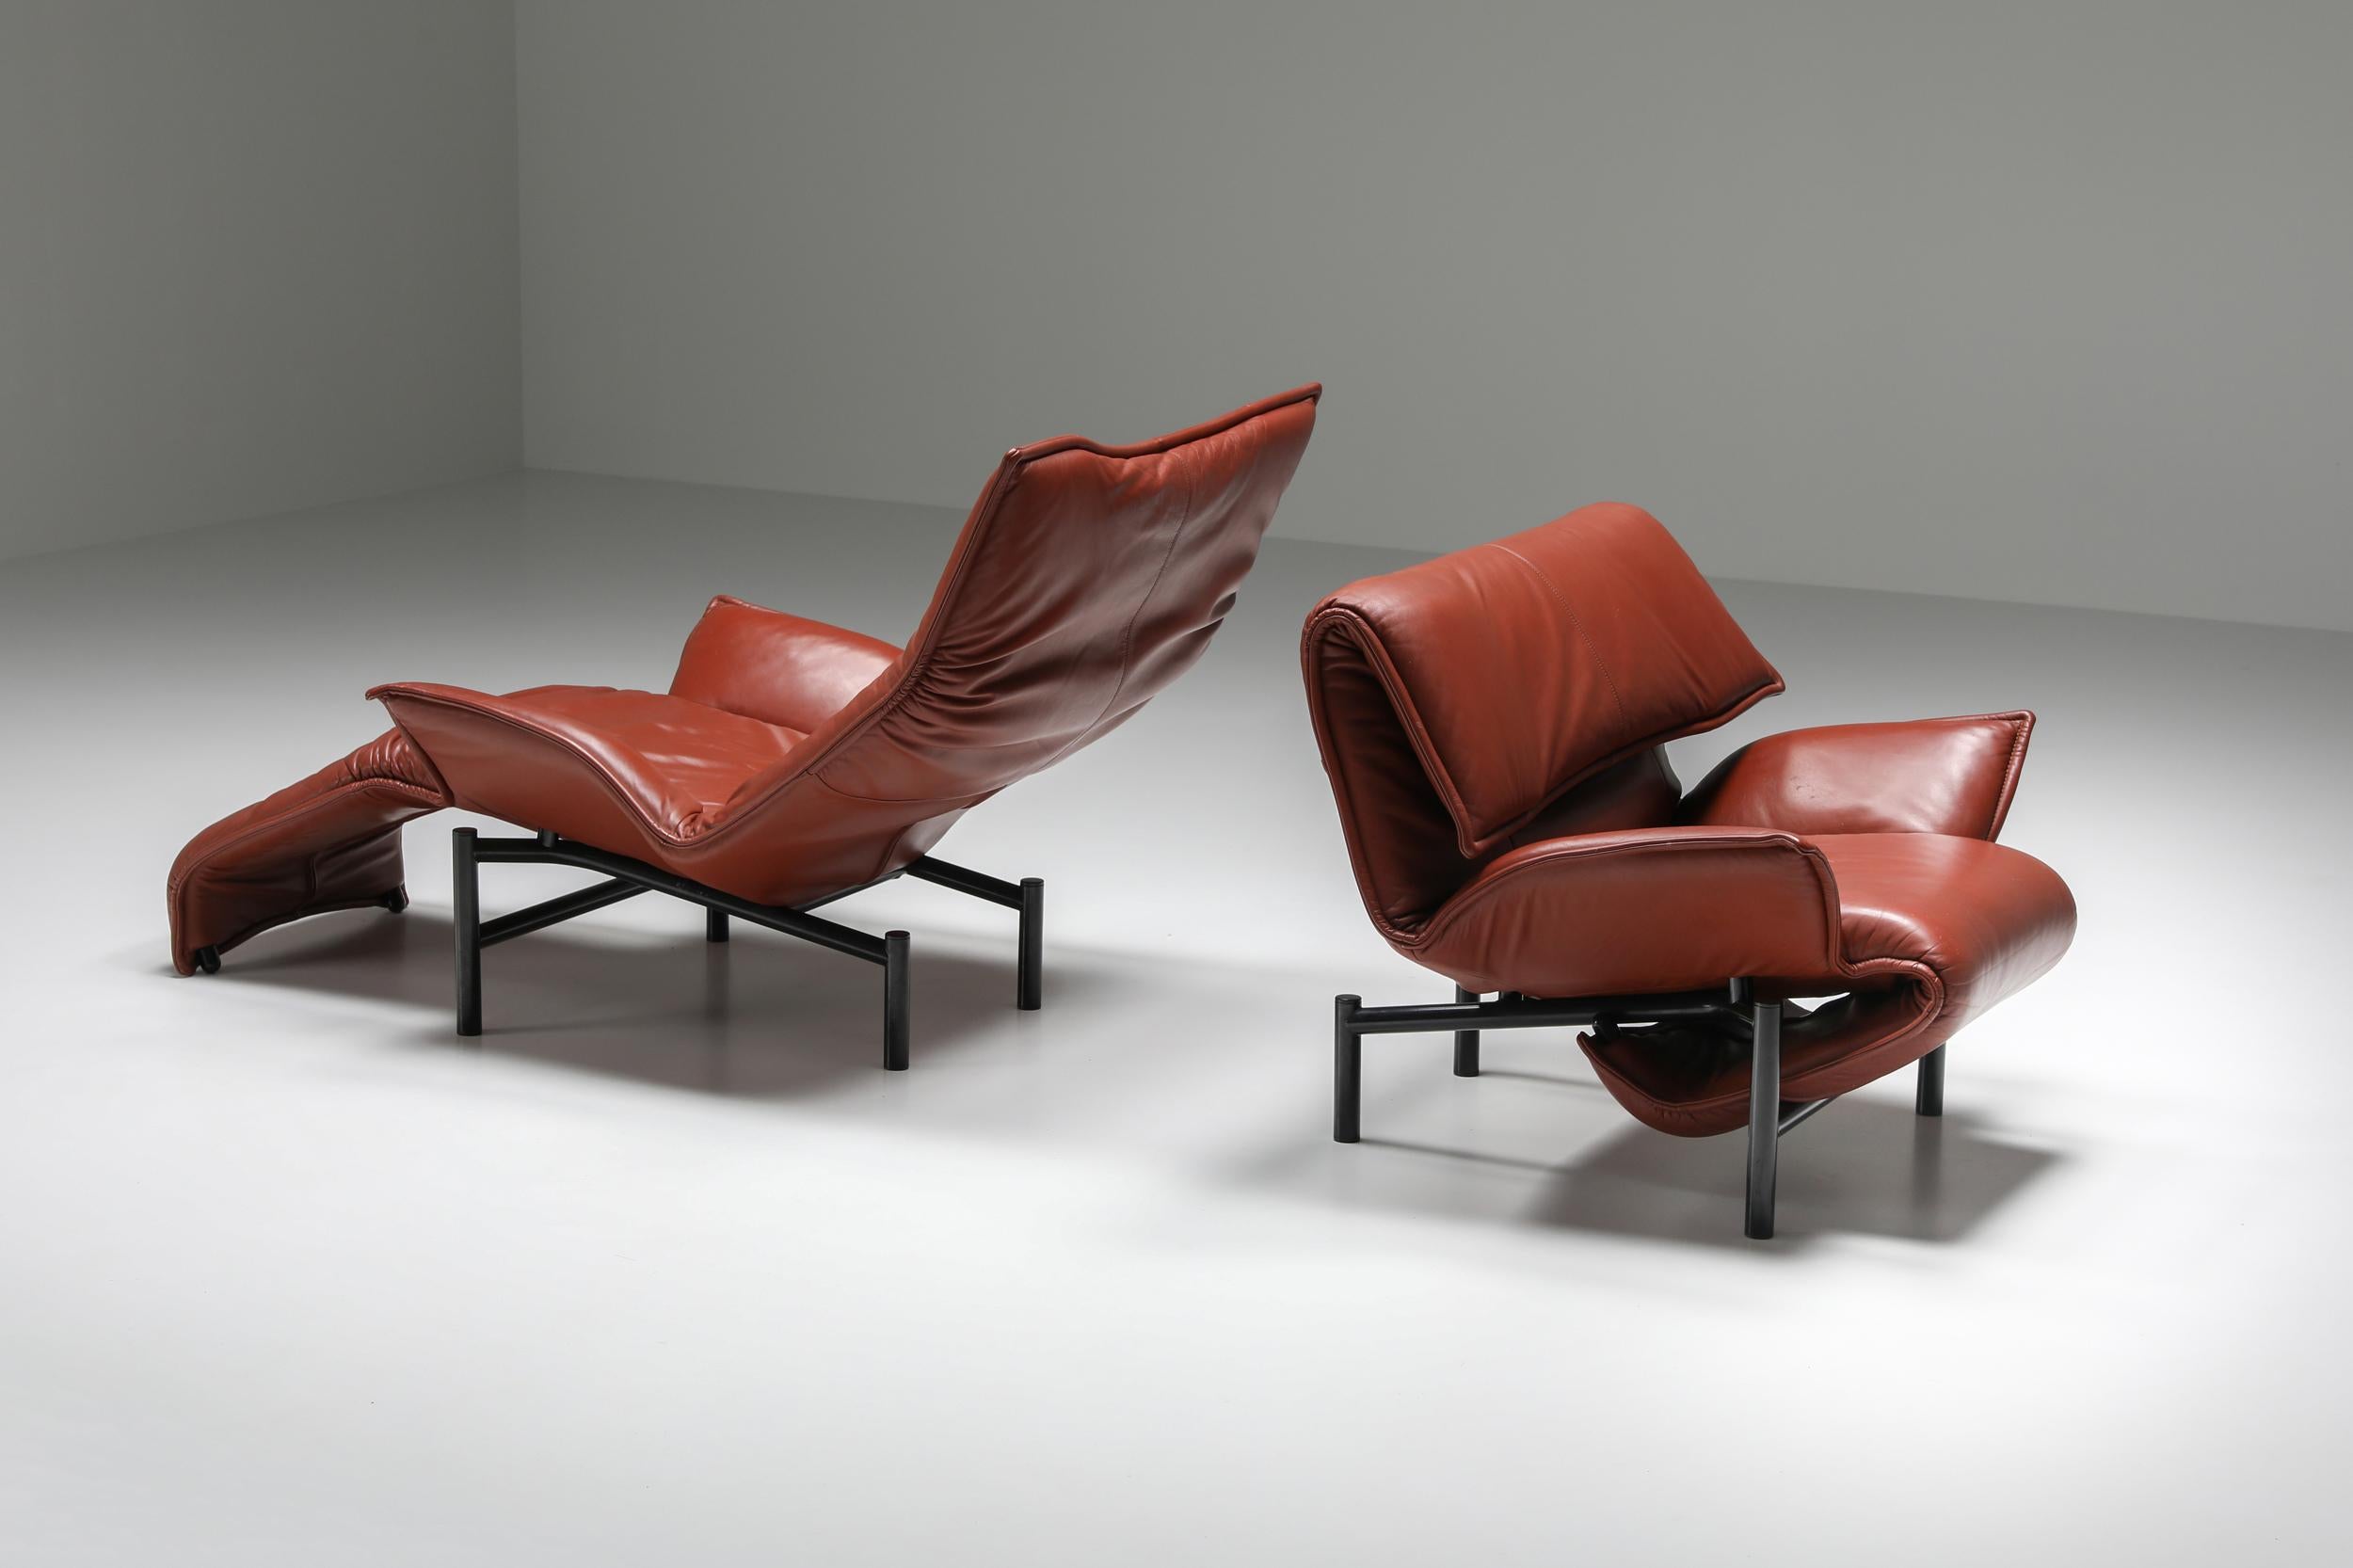 Veranda Lounge chair; Vico Magistretti; Cassina; 1980s; Leather; Living Room Set; Burgundy Leather; 

Veranda Lounge Chair in burgundy leather by Vico Magistretti for Cassina, circa 1983. The inner steel frame can be adjusted to reconfigure the